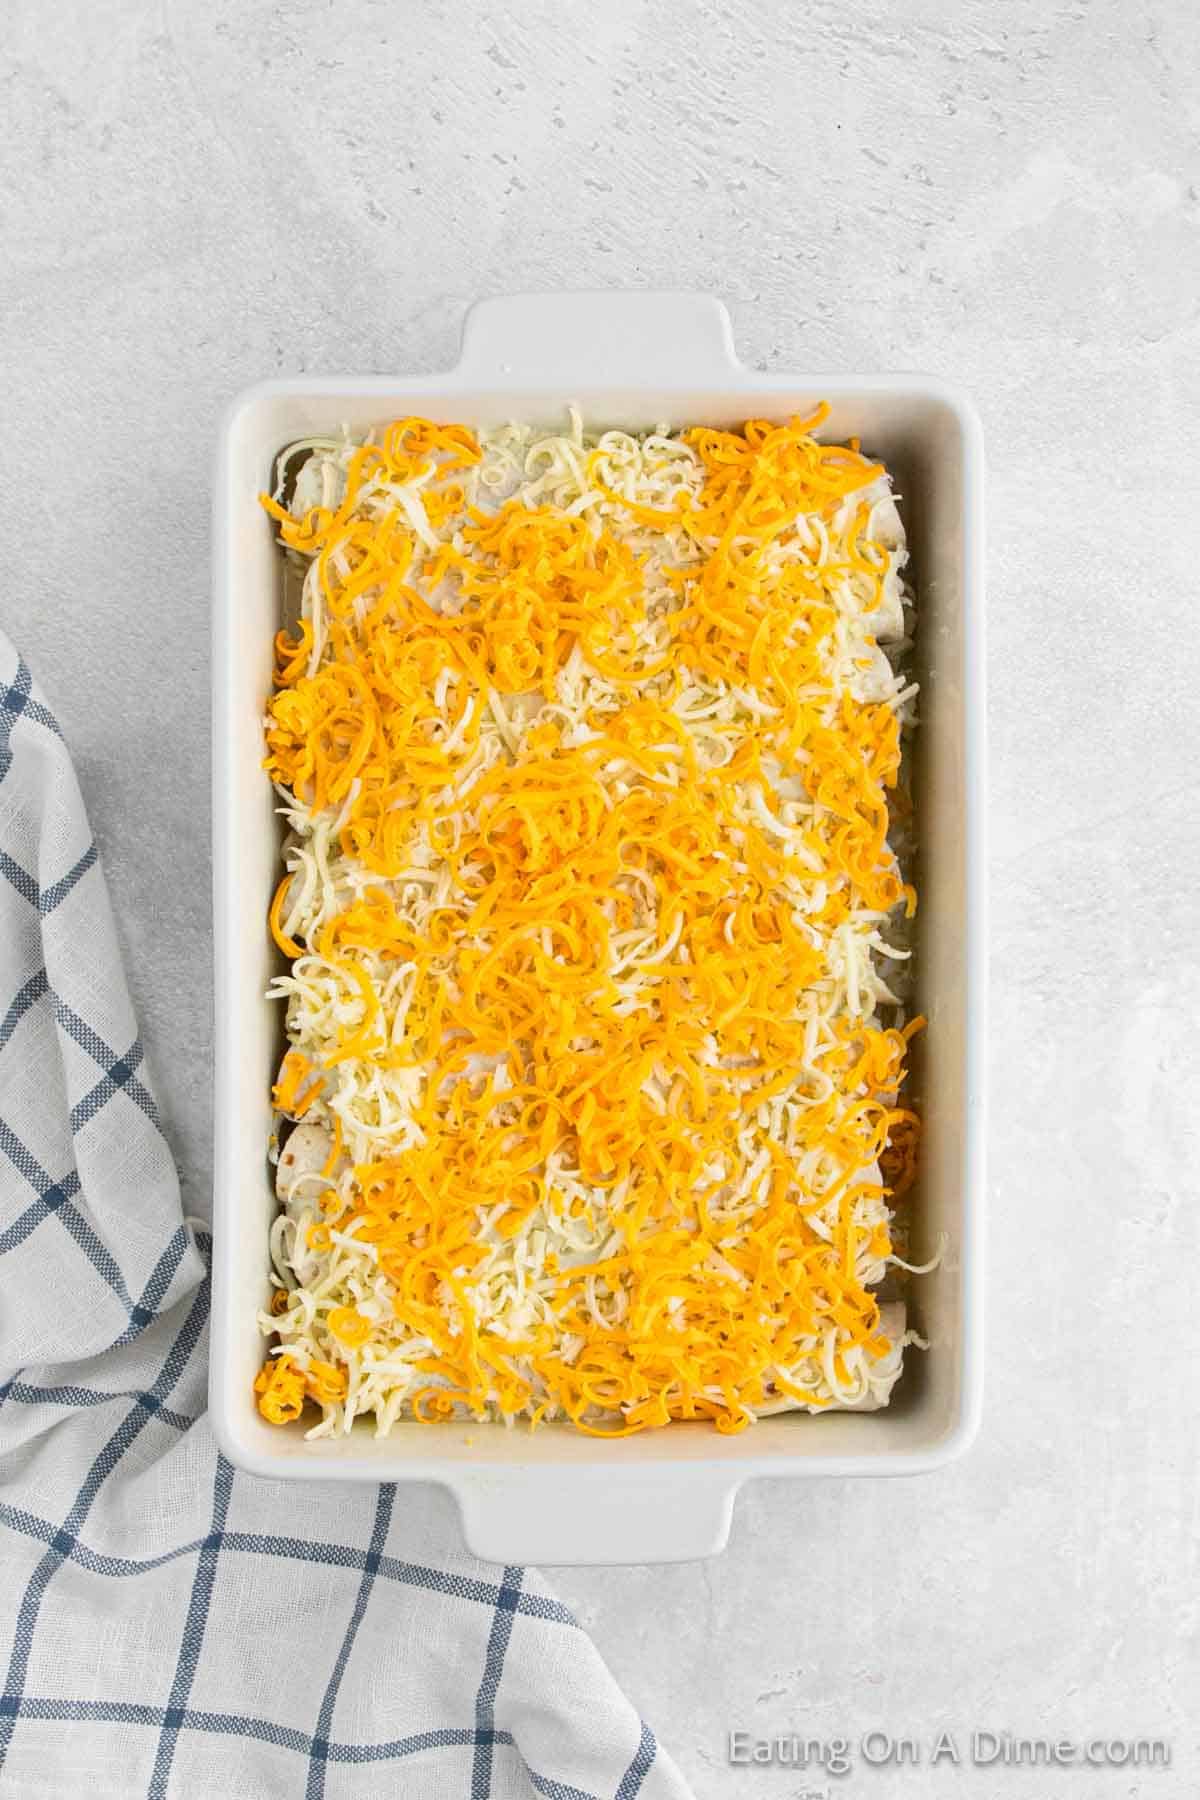 Shredded cheese tops the enchilada in a baking dish